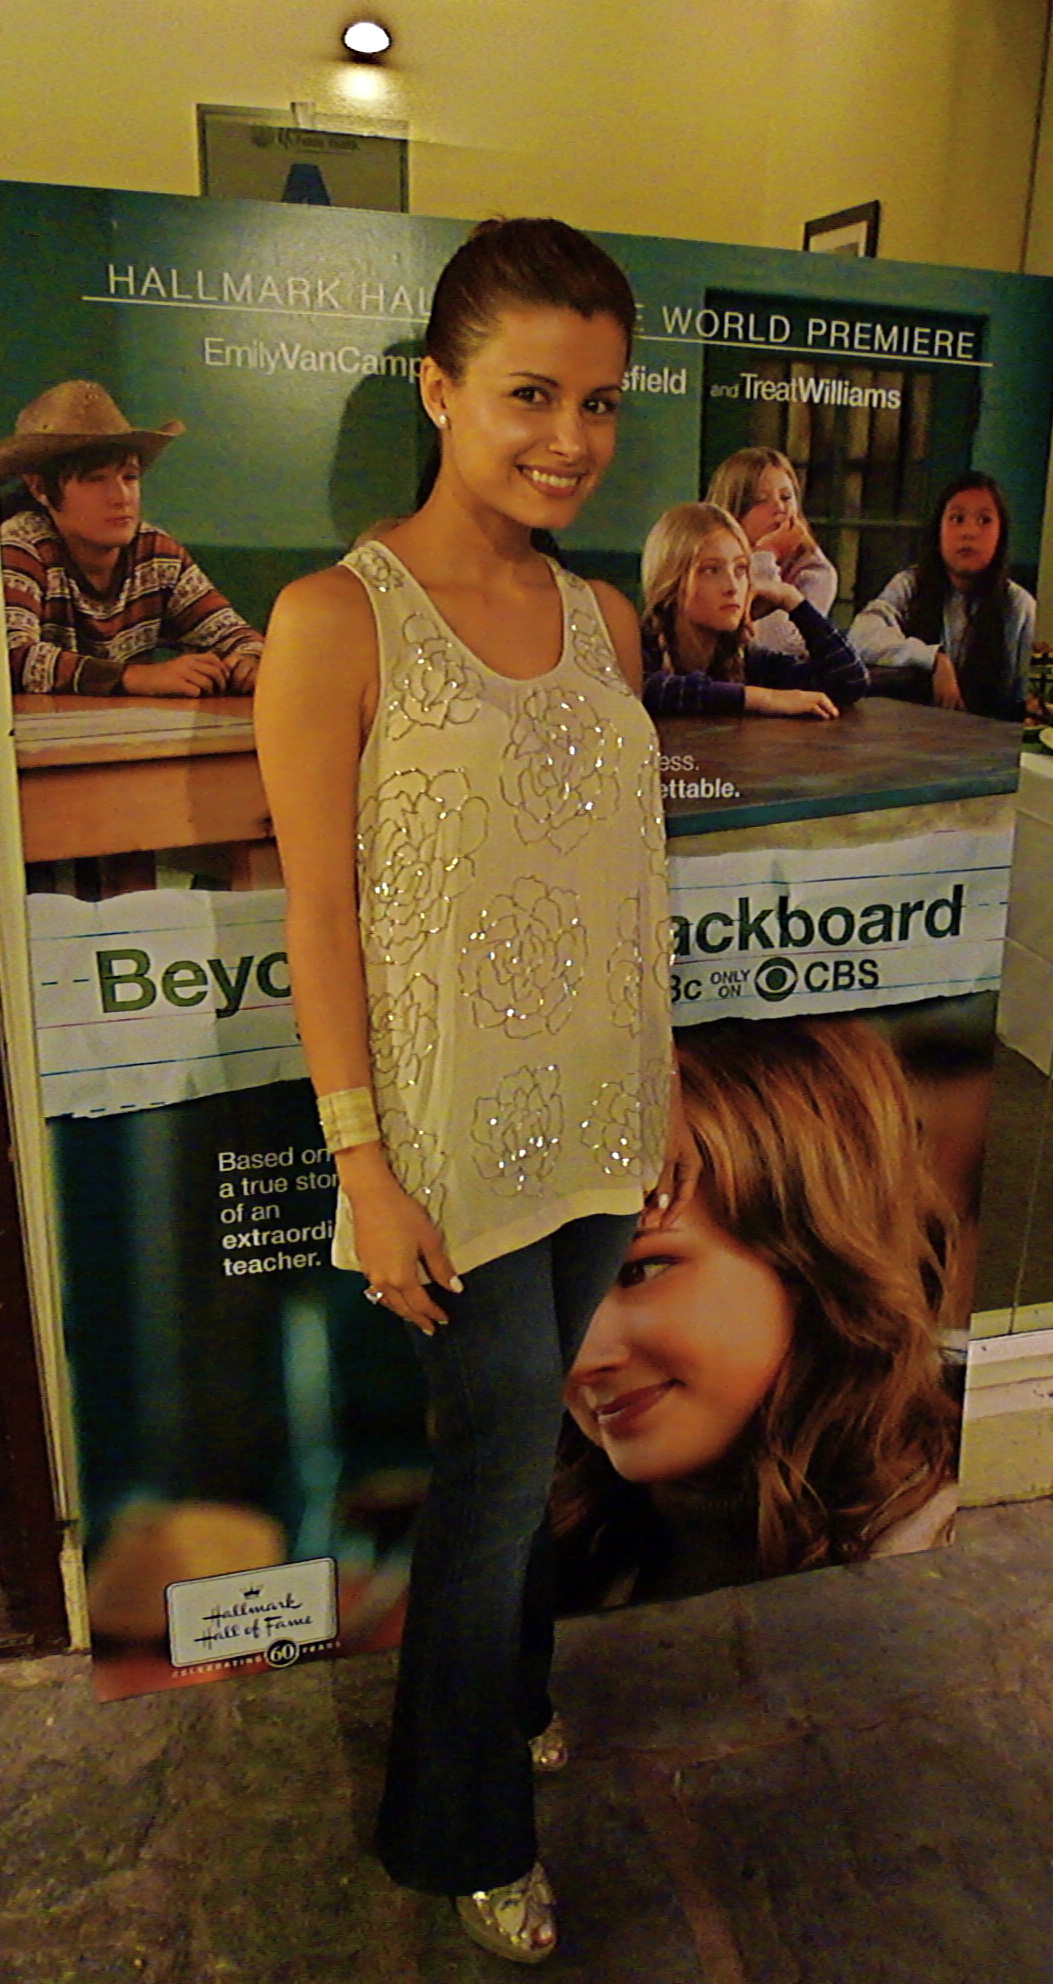 Hallmark Hall of Fame World Premiere of Beyond the Blackboard Actress Catalina Rodriguez